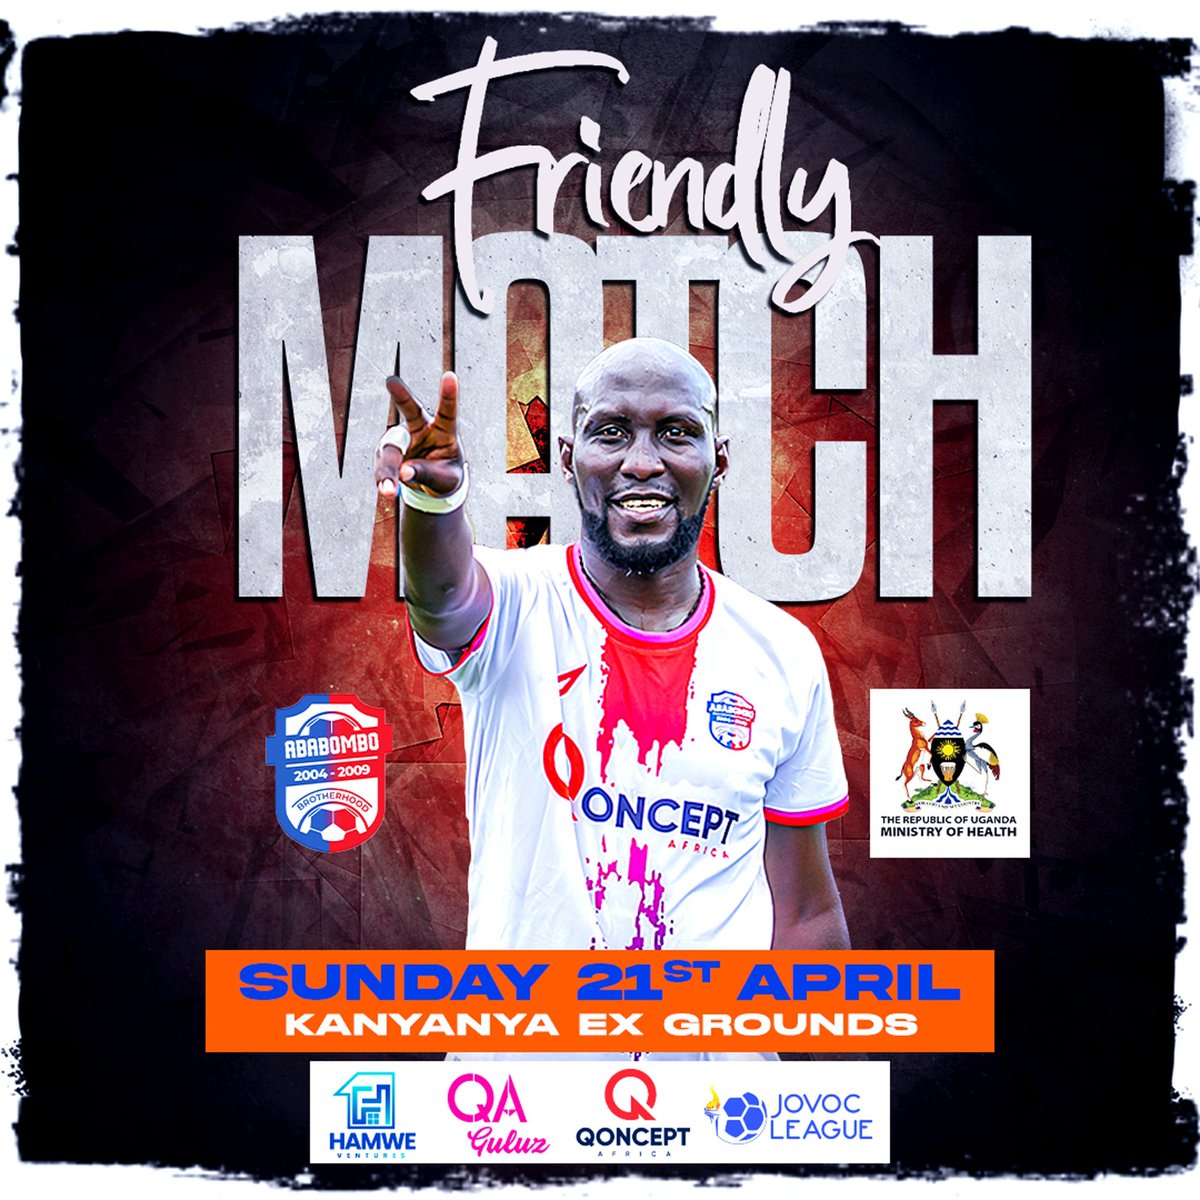 @AbabomboFc 🆚 @MinofHealthUG friendly match next wkend at Kanyanya grounds, the home of @TheJovocLeague. I request @RichardKabanda2 @ainbyoo @JaneRuth_Aceng @DianaAtwine not to miss. As @TheJovocLeague one of our objectives is fighting NCDs. @jekayug @Iamturyamusiima @AgabaBen0